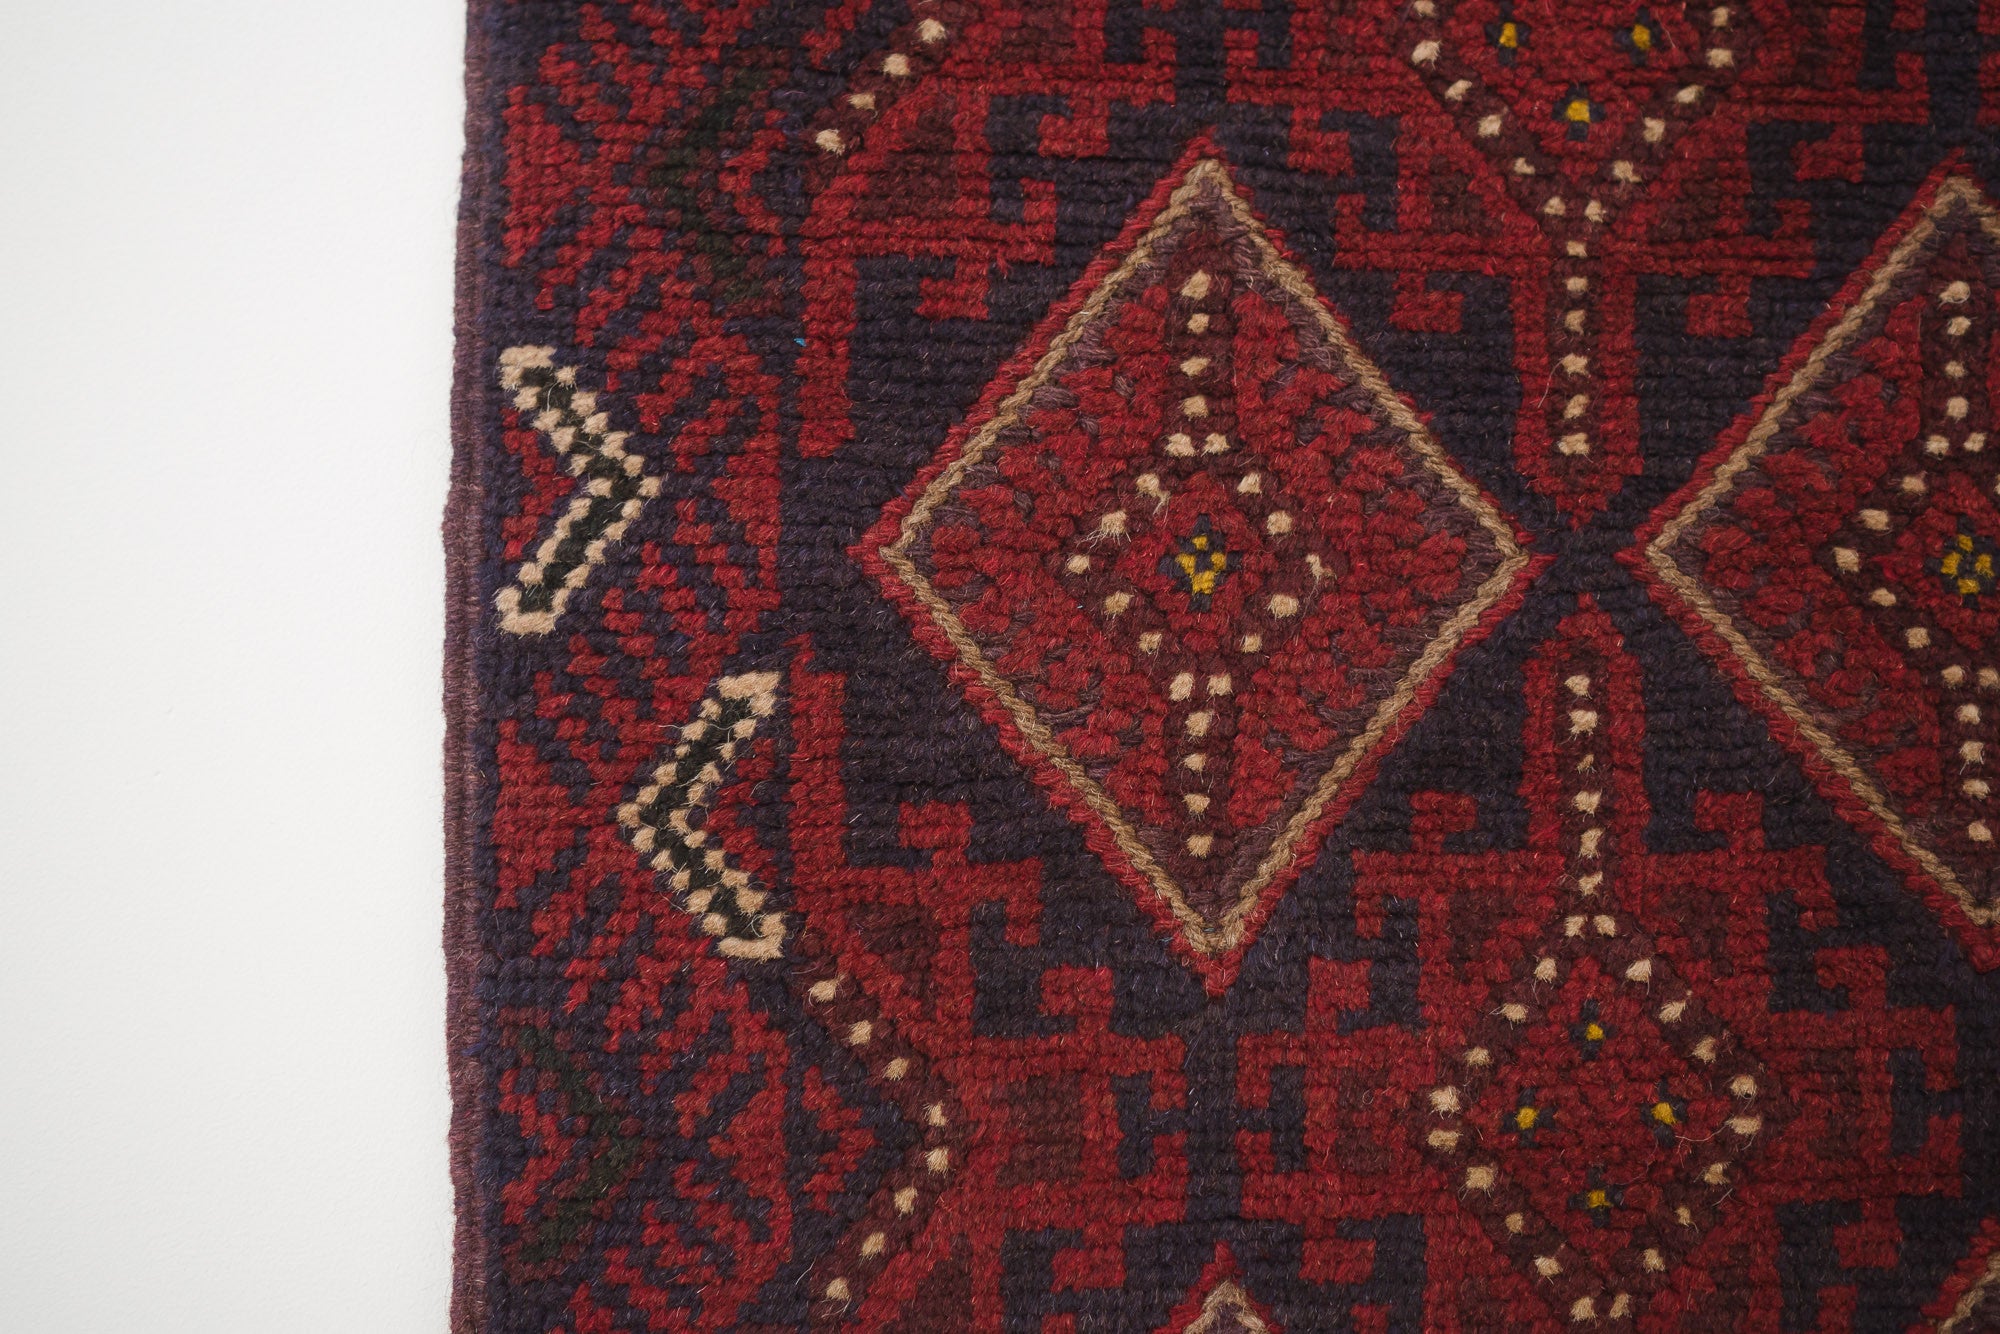 Sold at Auction: Hand Knotted Afghan Rug 2.5x4.5 ft #4686